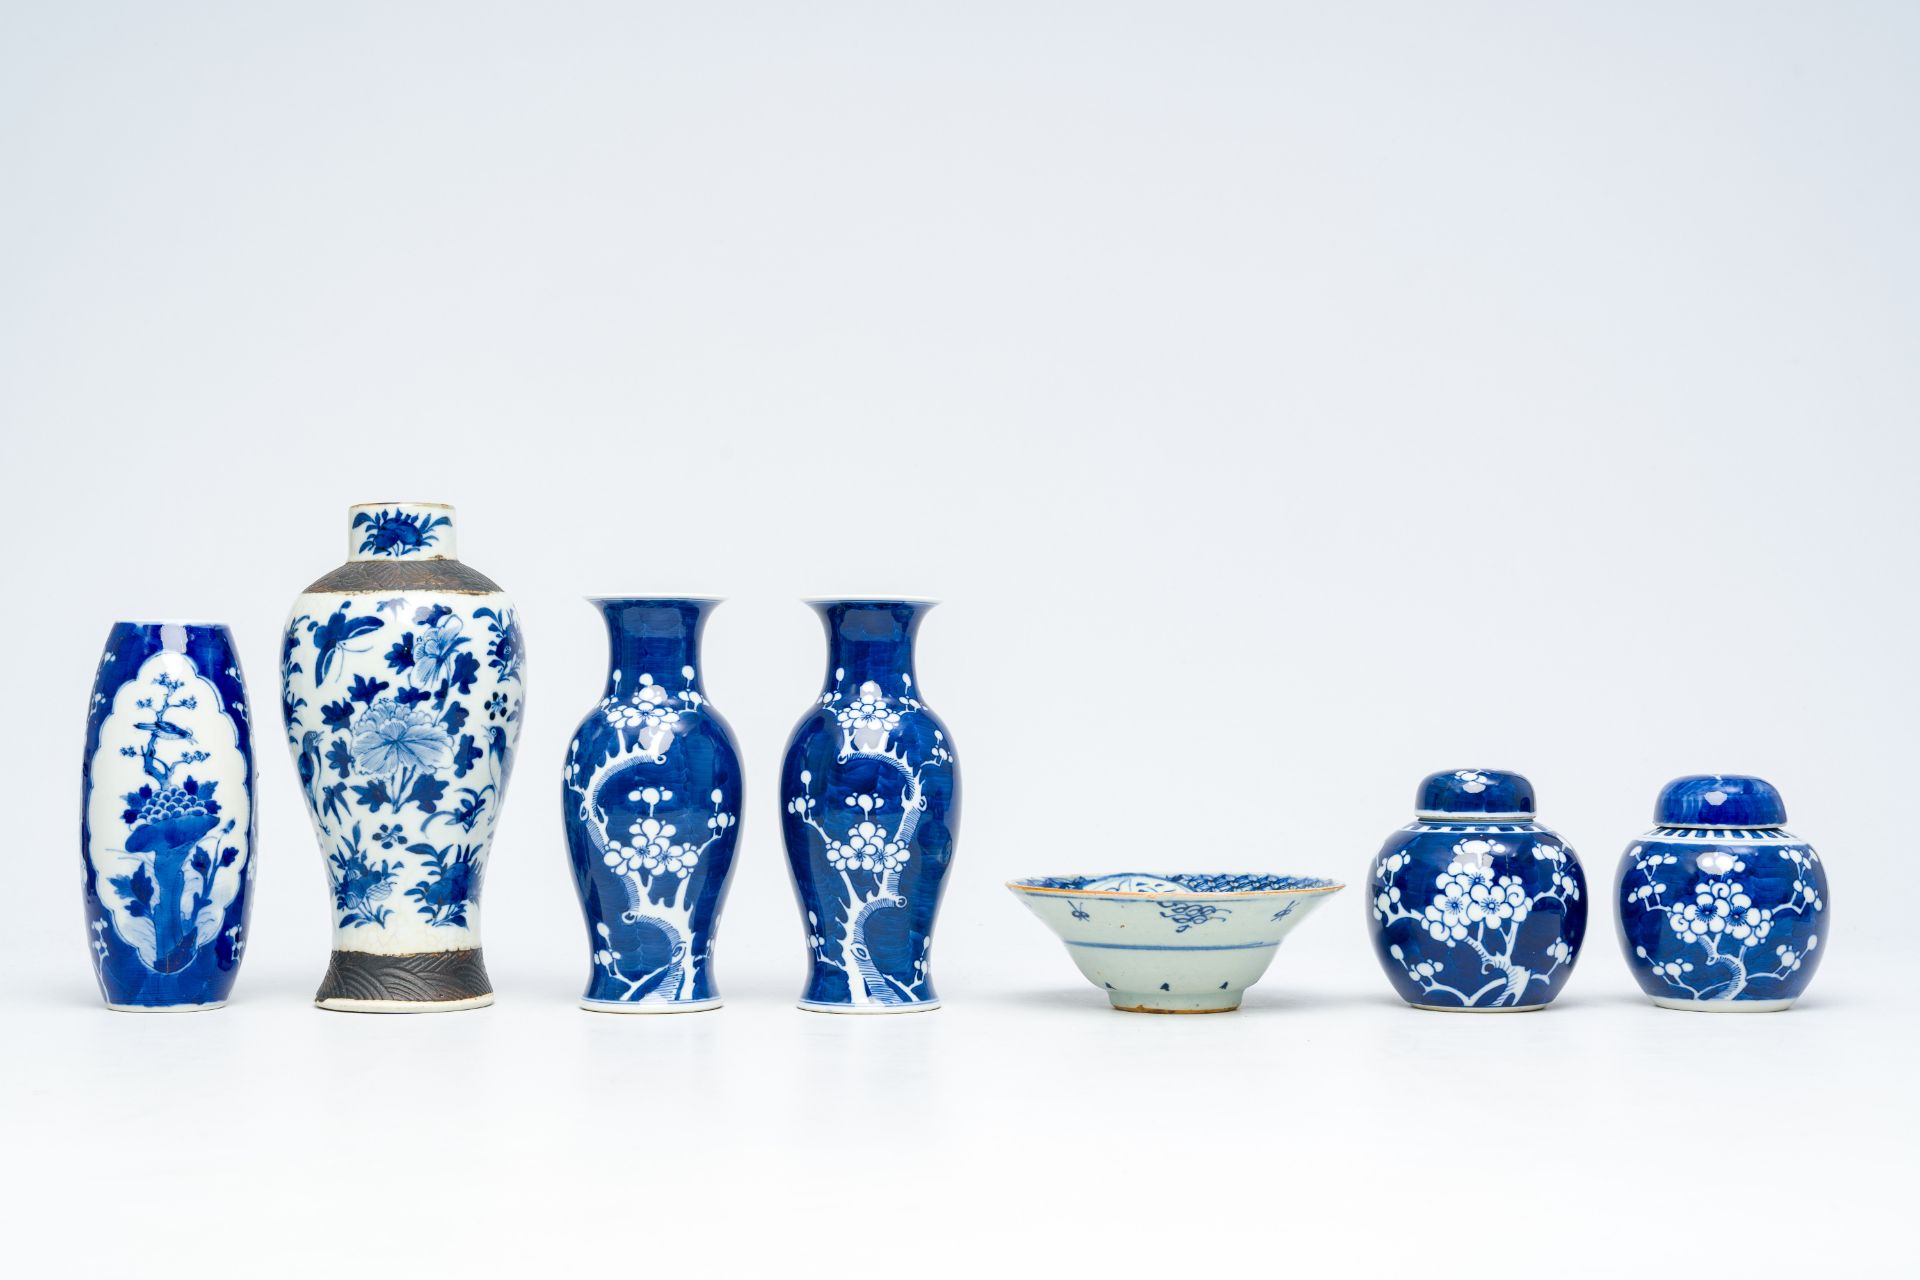 A varied collection of Chinese blue and white porcelain with floral design, 19th/20th C. - Image 3 of 18